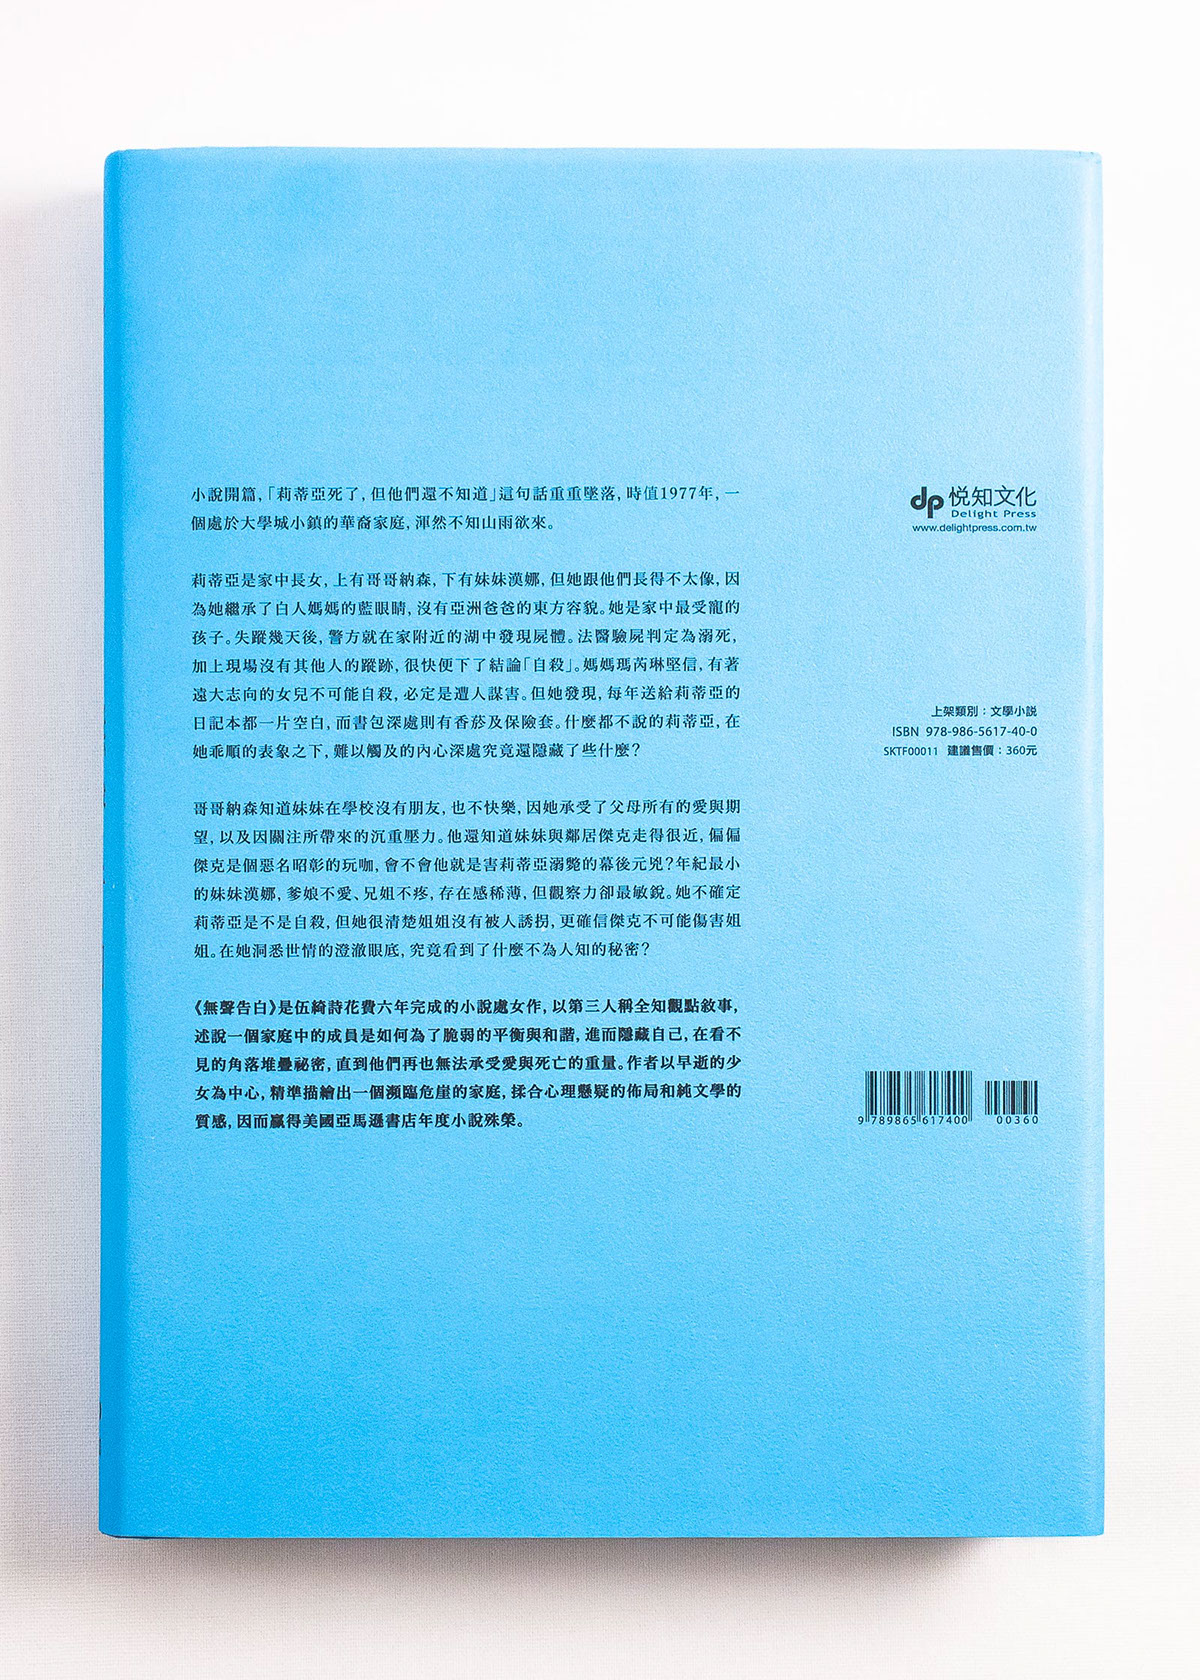 typographical design Complex Chinese chinese taiwanese fiction novel Celeste Ng Everything_I_Never_Told_You 無聲告白 悅知 embossment Chinese radicals printing technique hardcover Book Cover Design